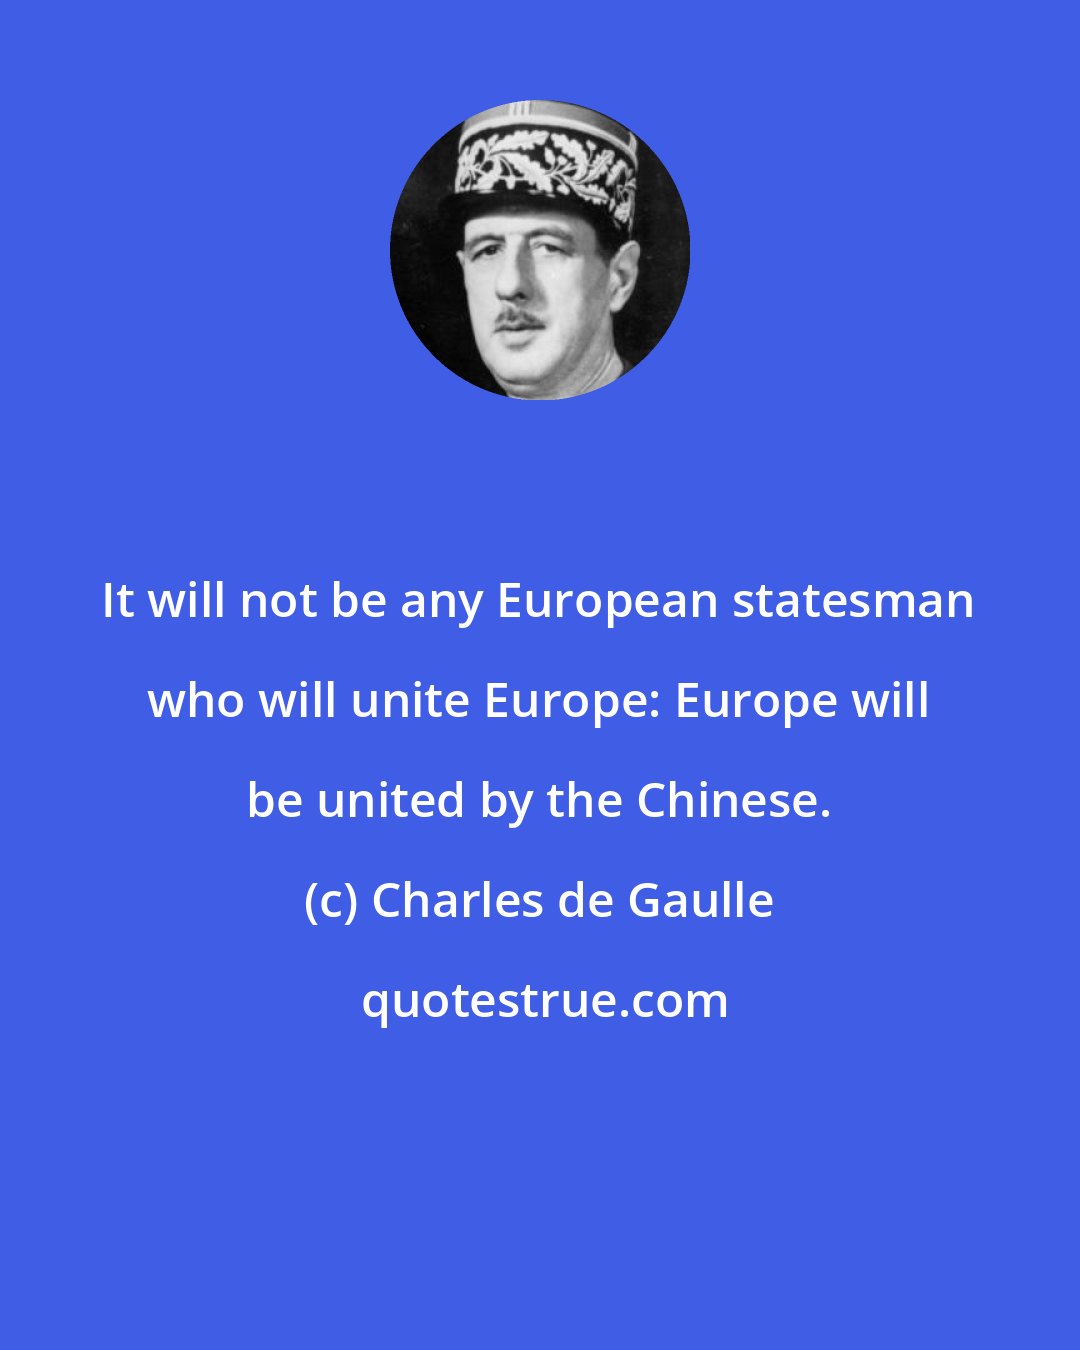 Charles de Gaulle: It will not be any European statesman who will unite Europe: Europe will be united by the Chinese.